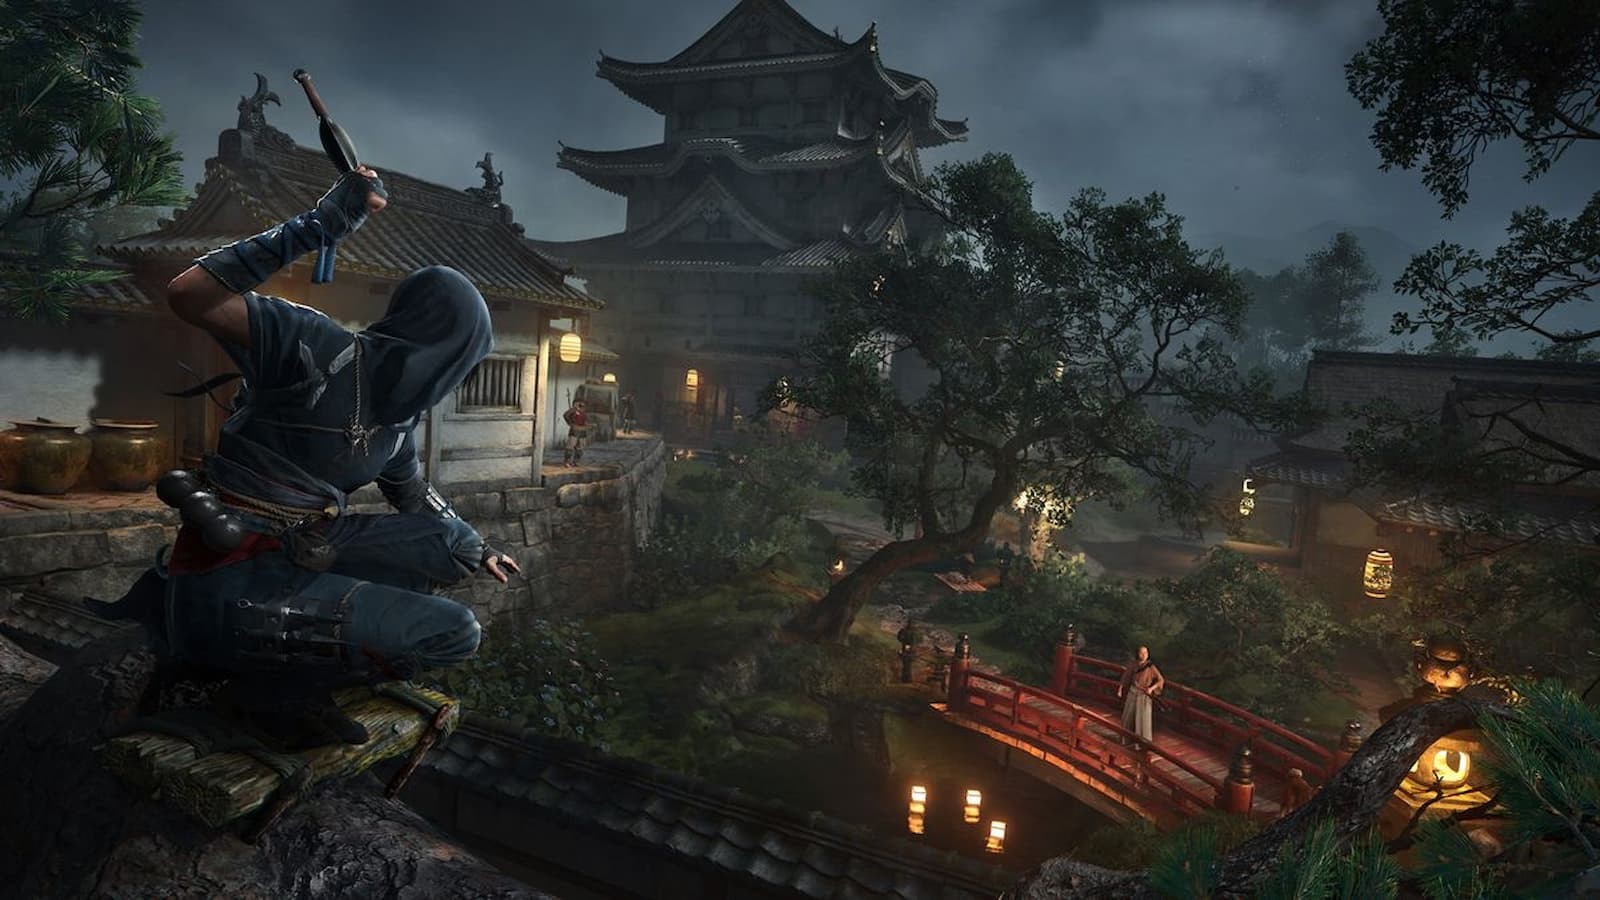 Players are not happy with Yasuke as a protagonist in the game.